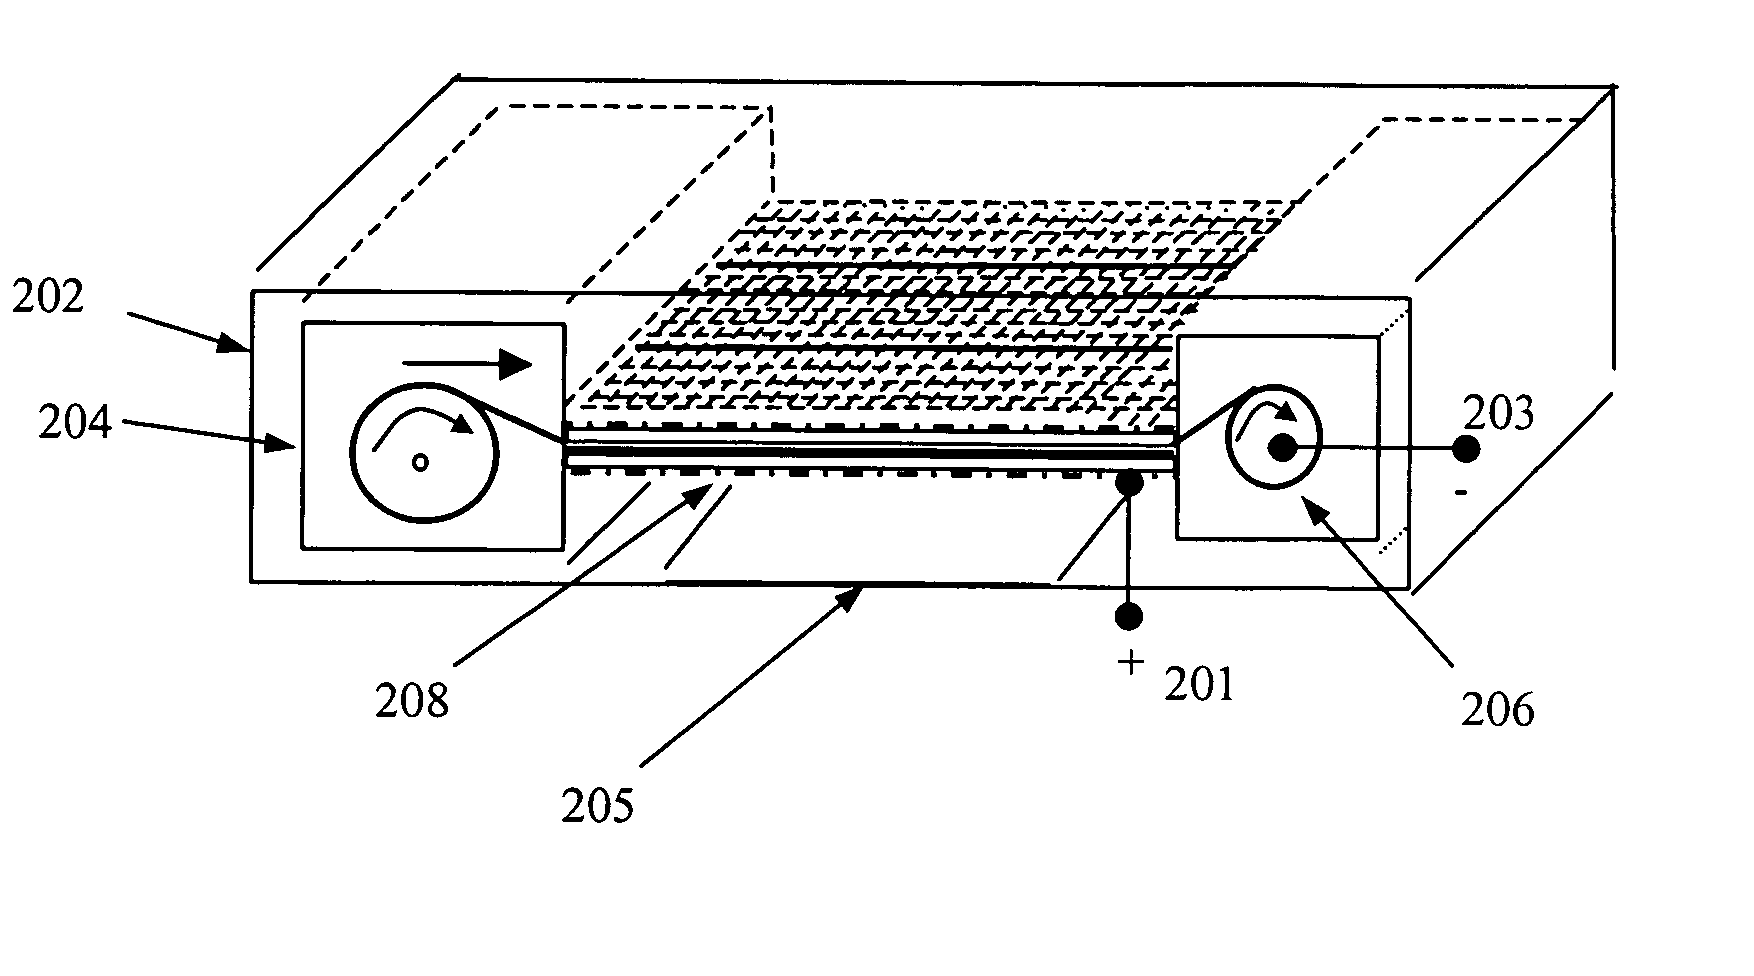 Actively controlled metal-air battery and method for operating same